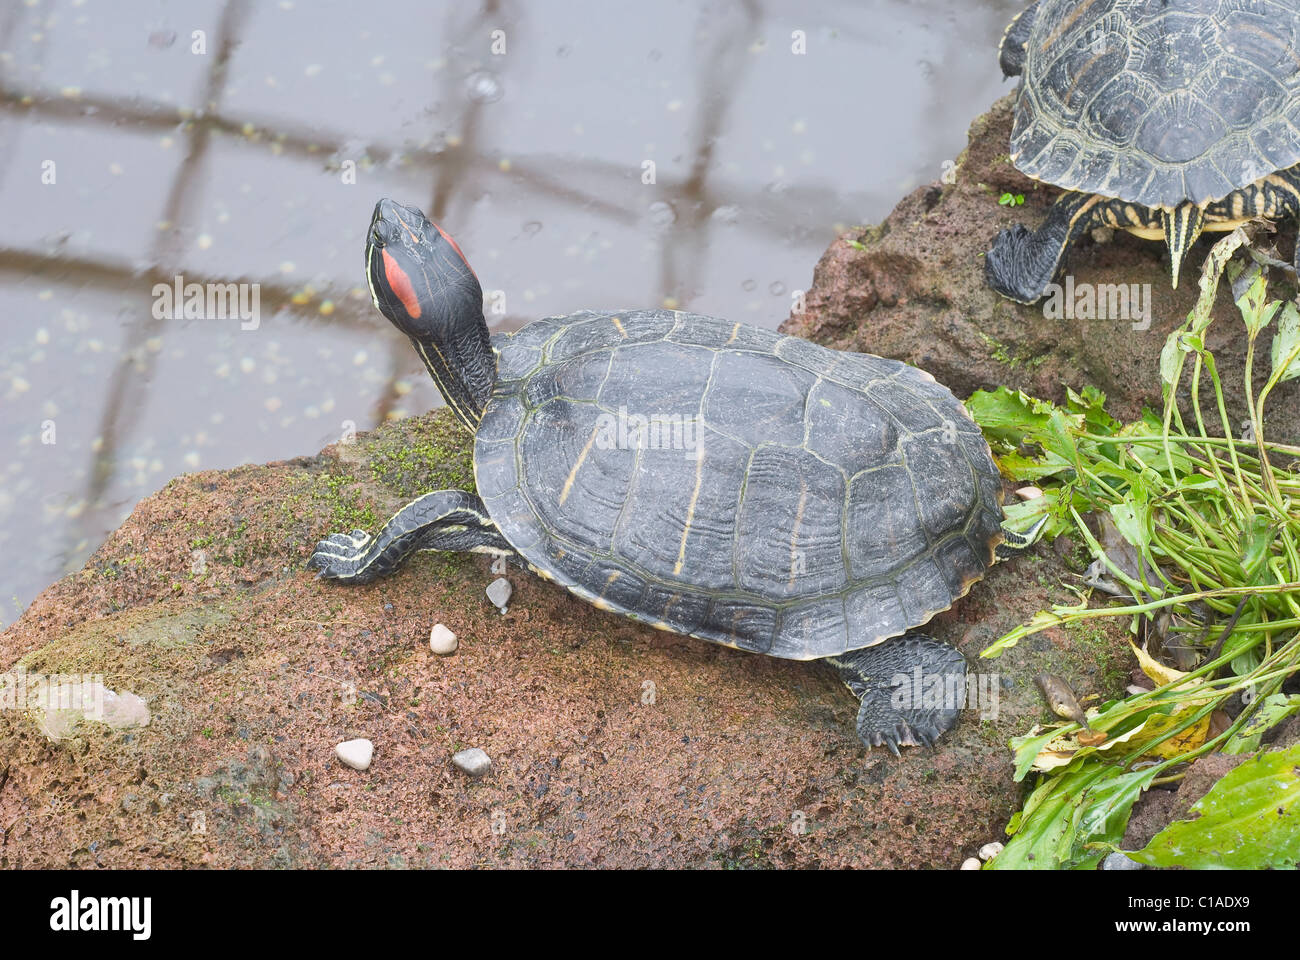 Red Eared Slider Turtle on the bank of a pond Stock Photo